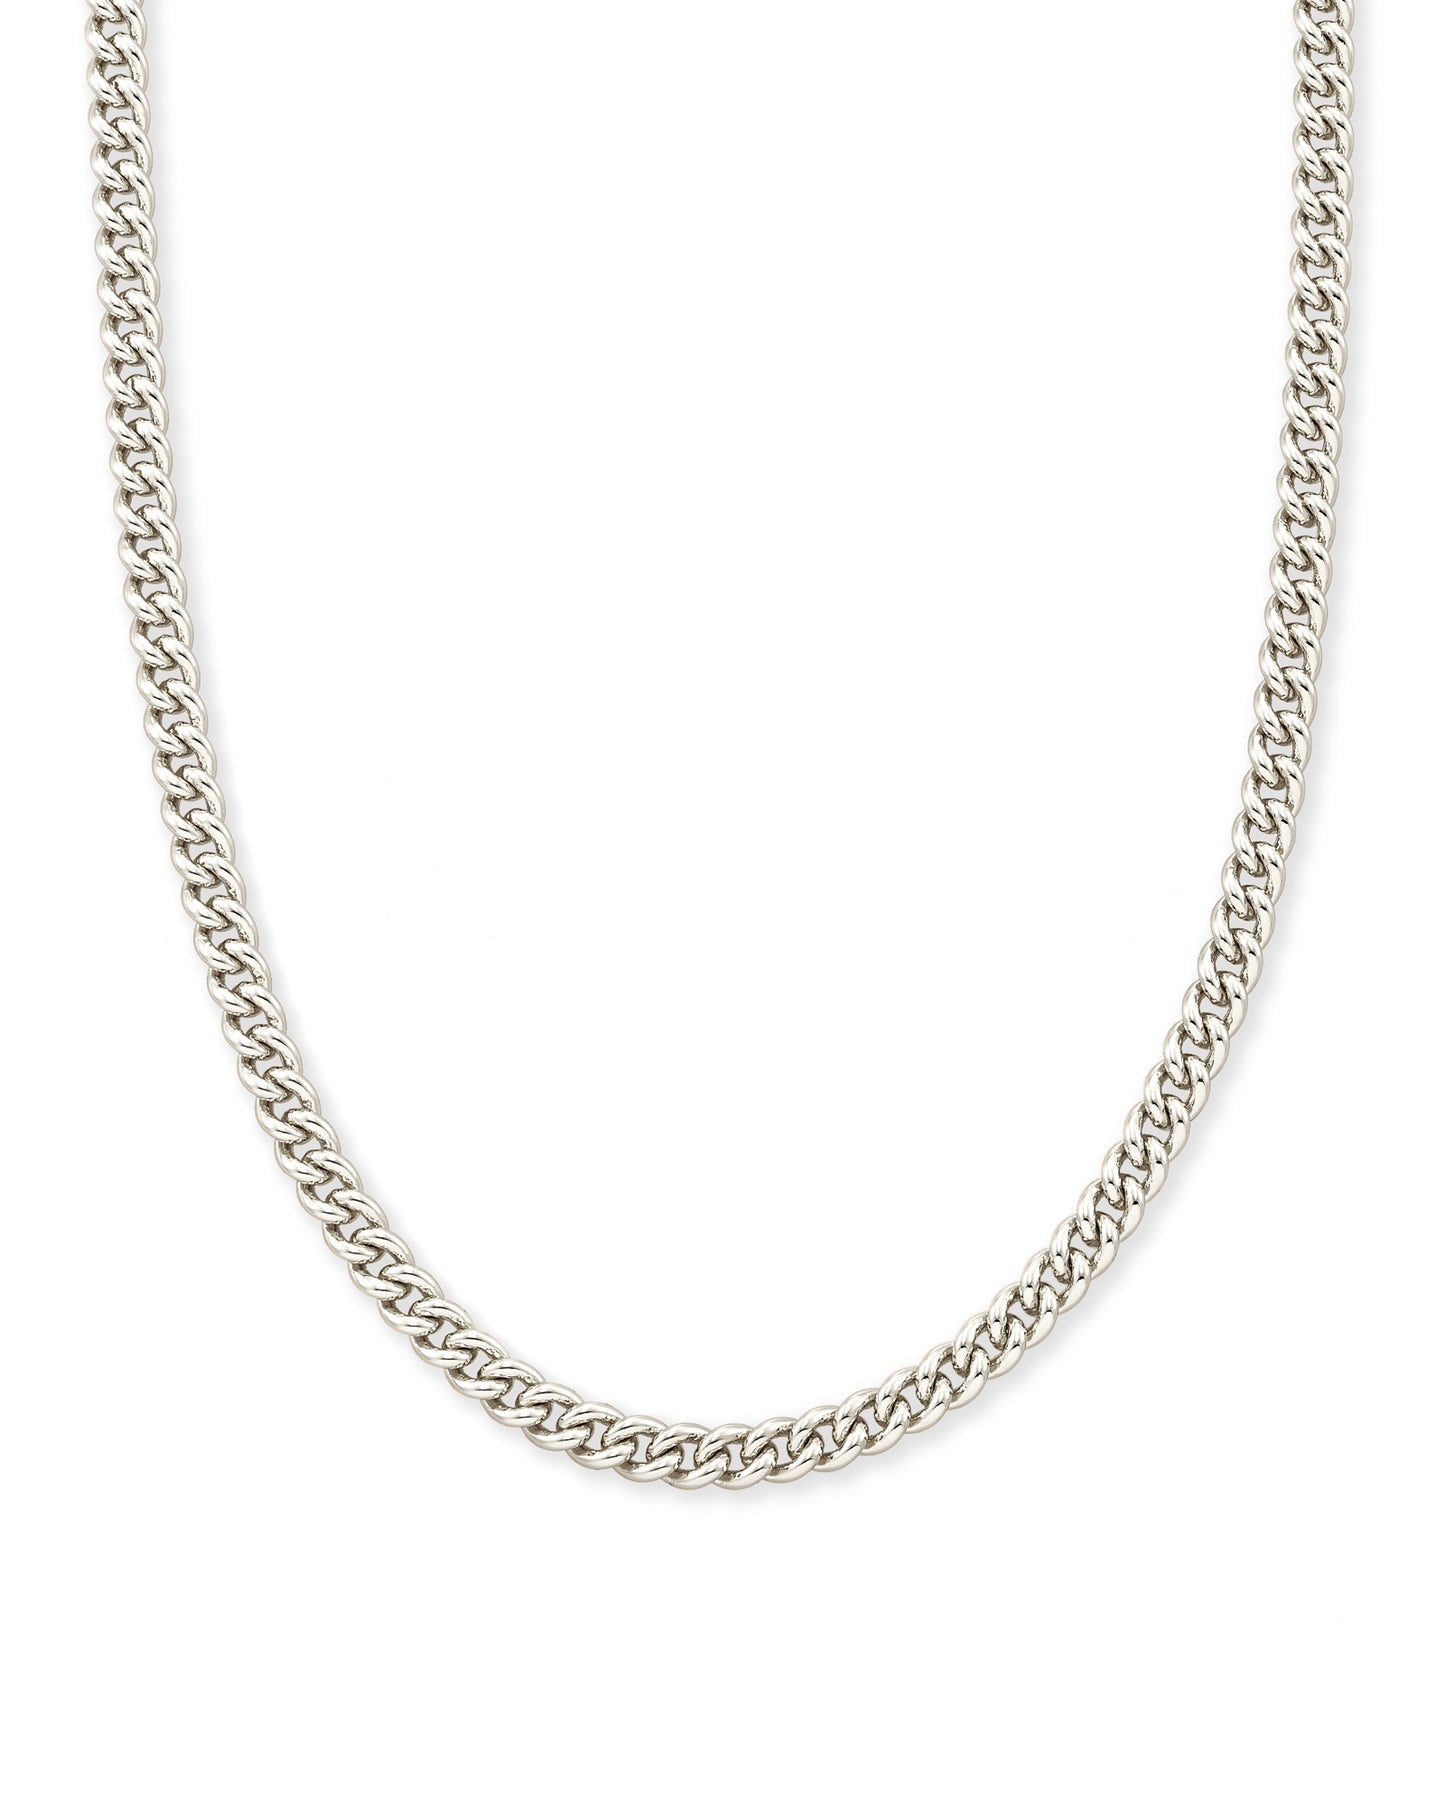 Kendra Scott: Ace Chain Necklace in Rhodium